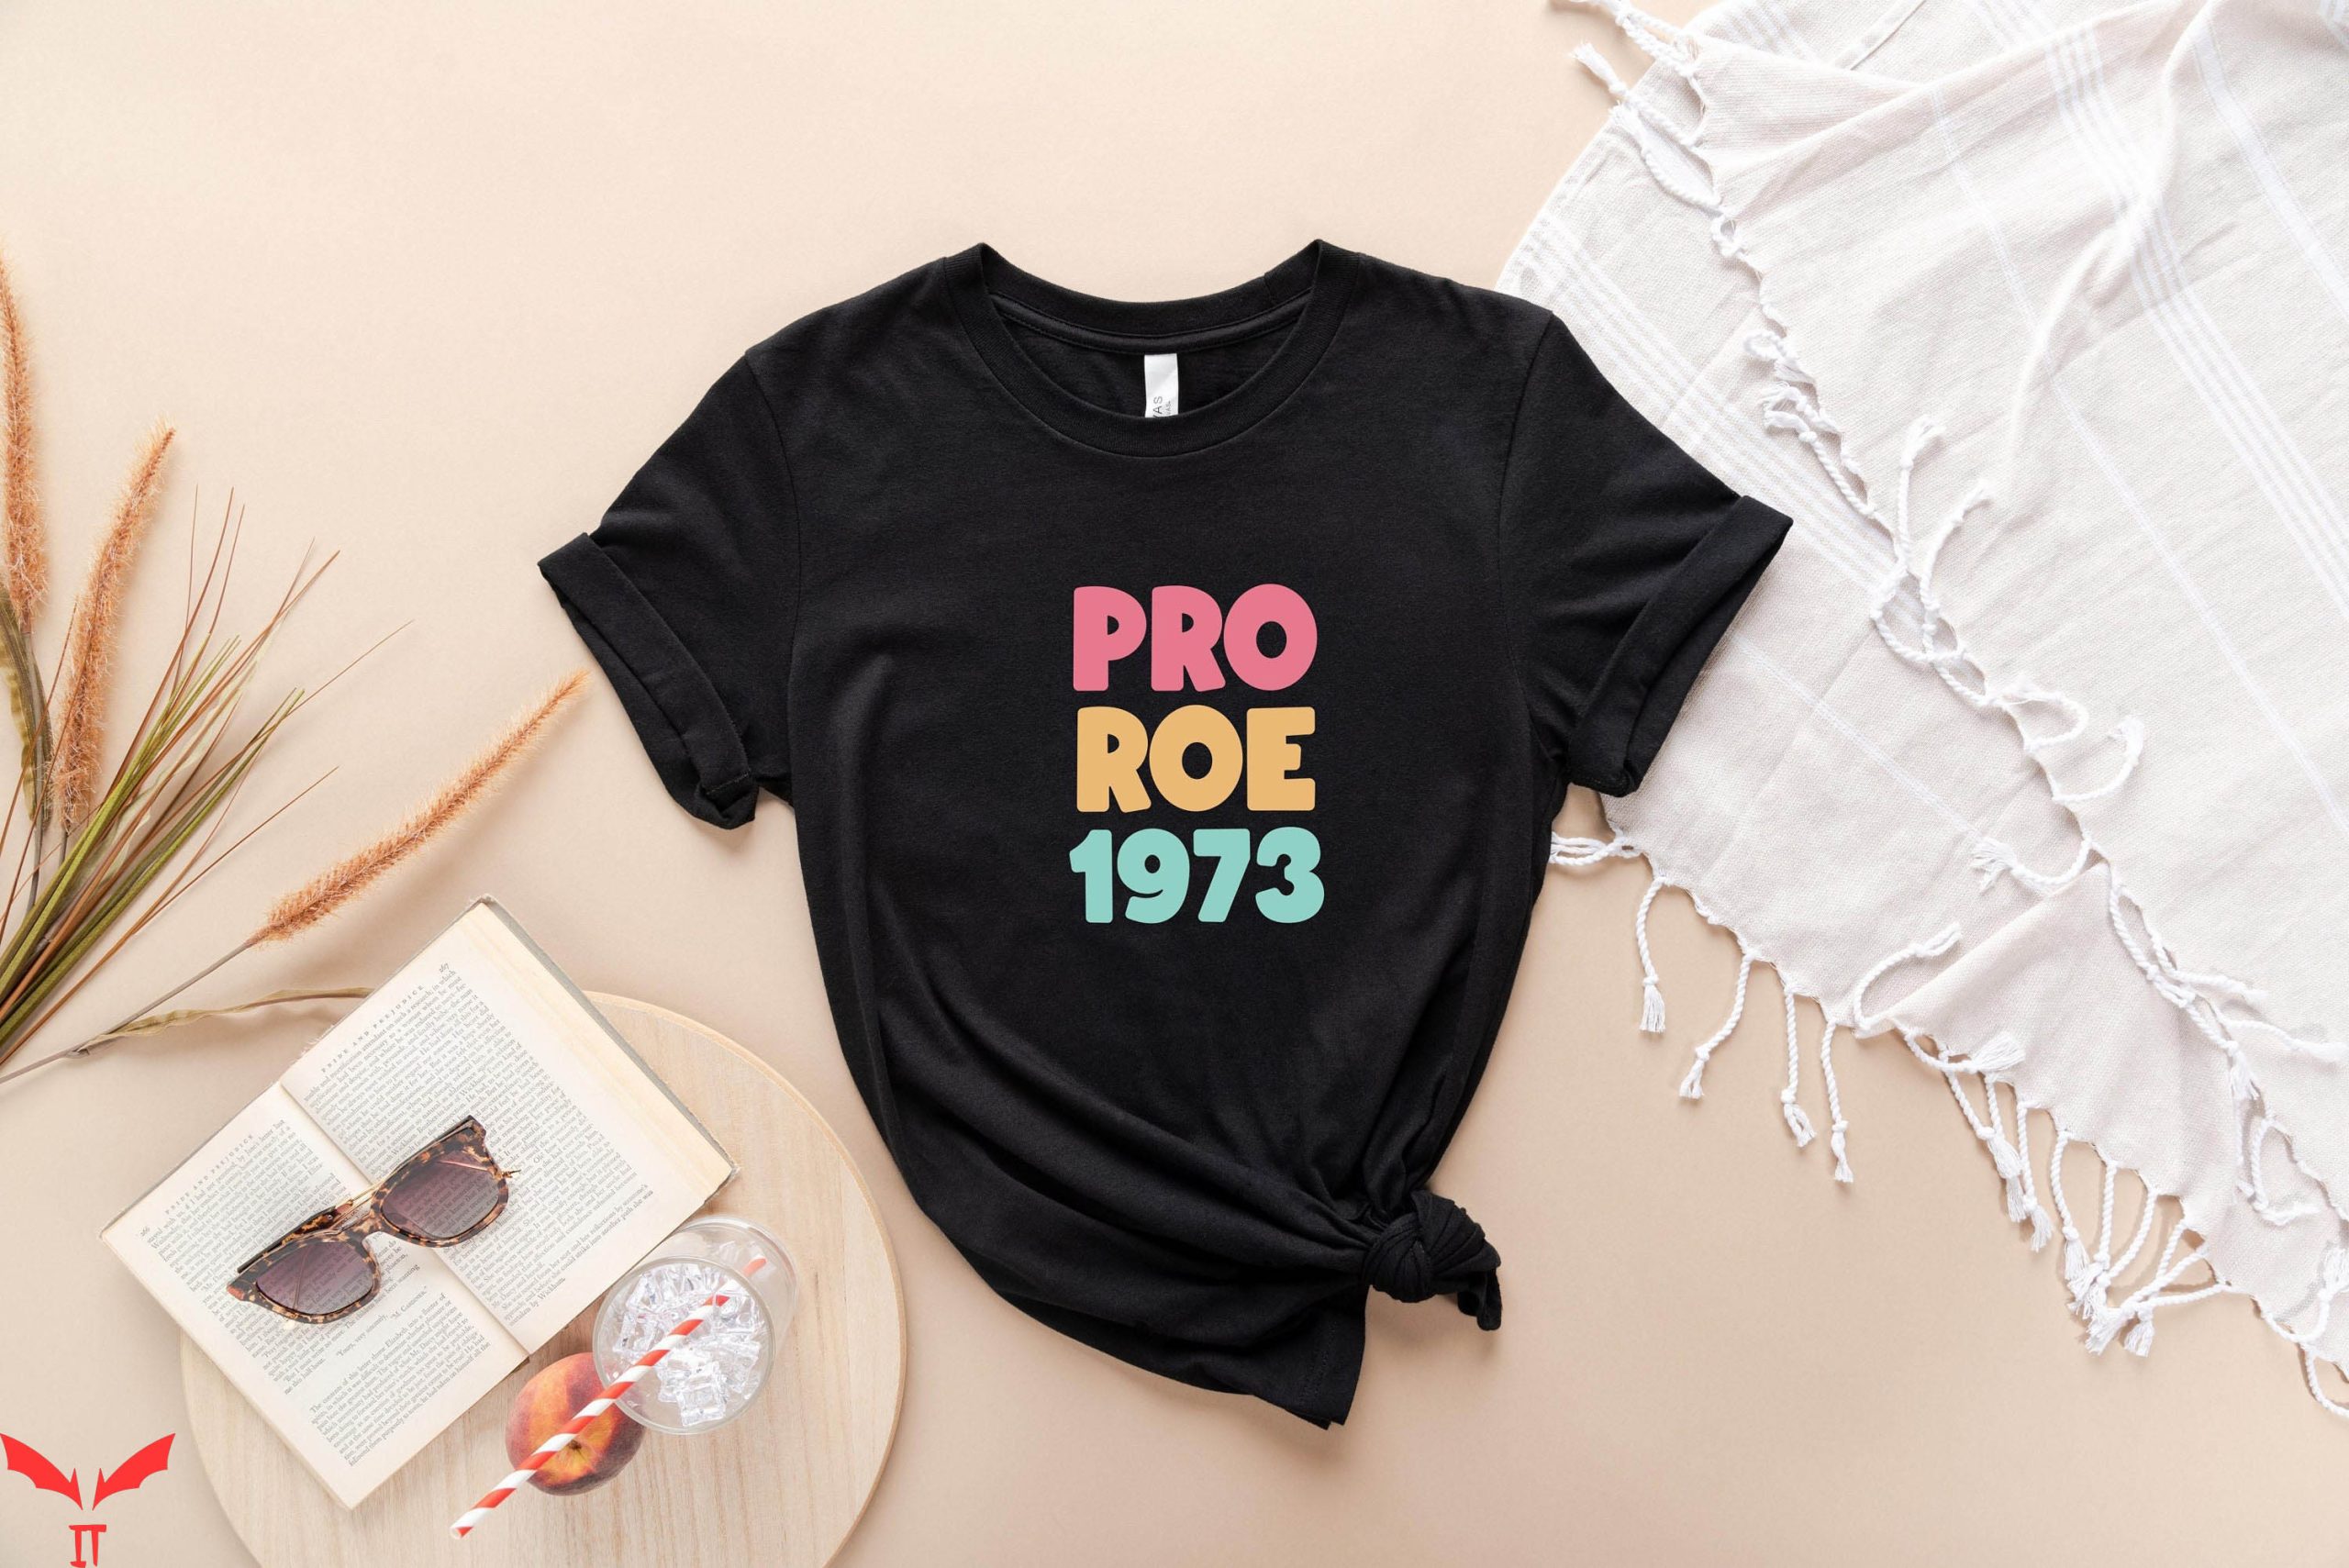 Pro Roe T-Shirt 1973 Cool Women's Rights Support Tee